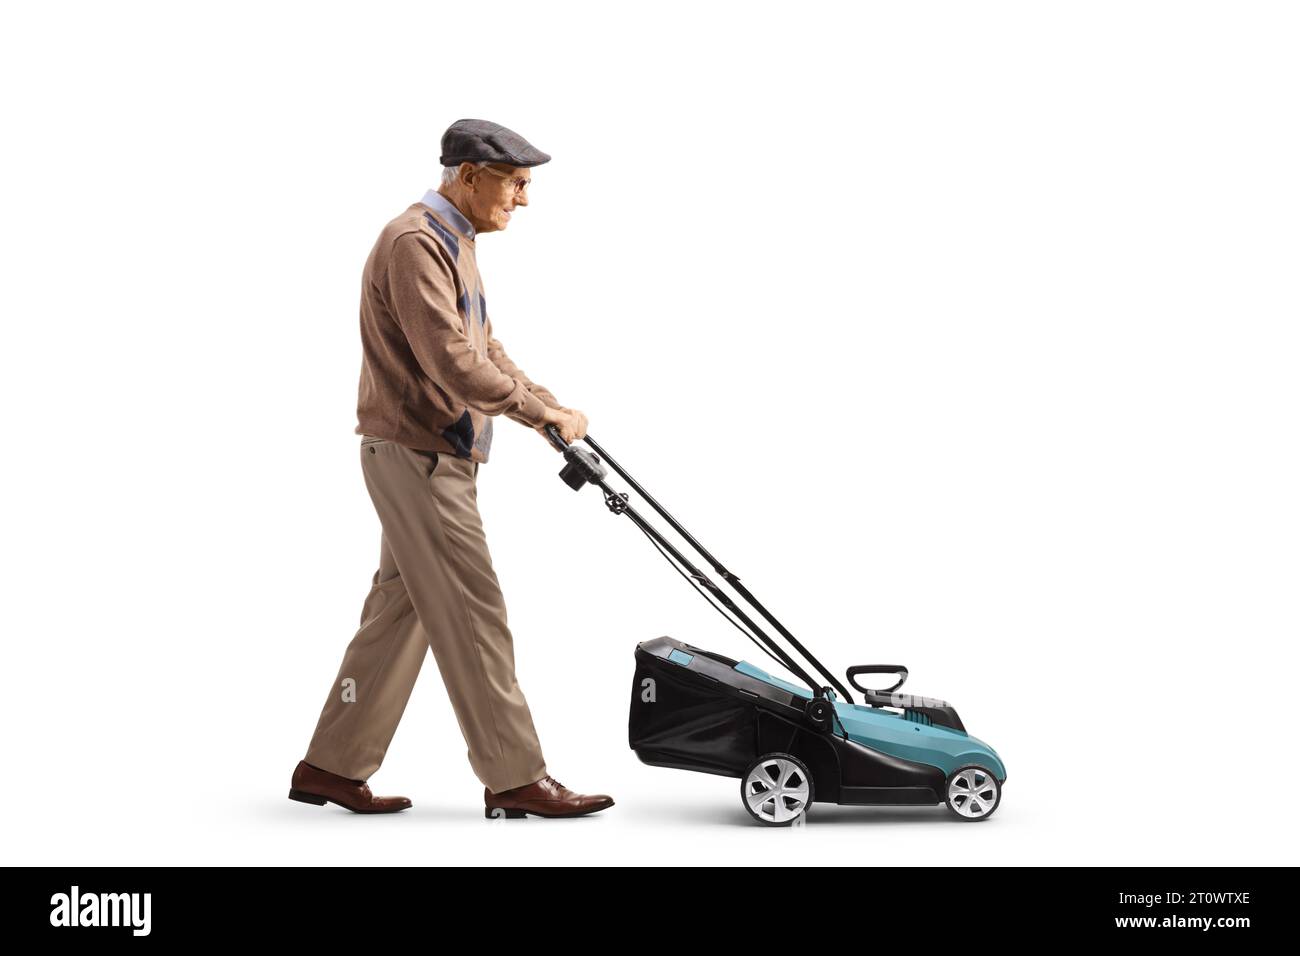 Full length profile shot of an elderly man with a lawnmower machine isolated on white background Stock Photo